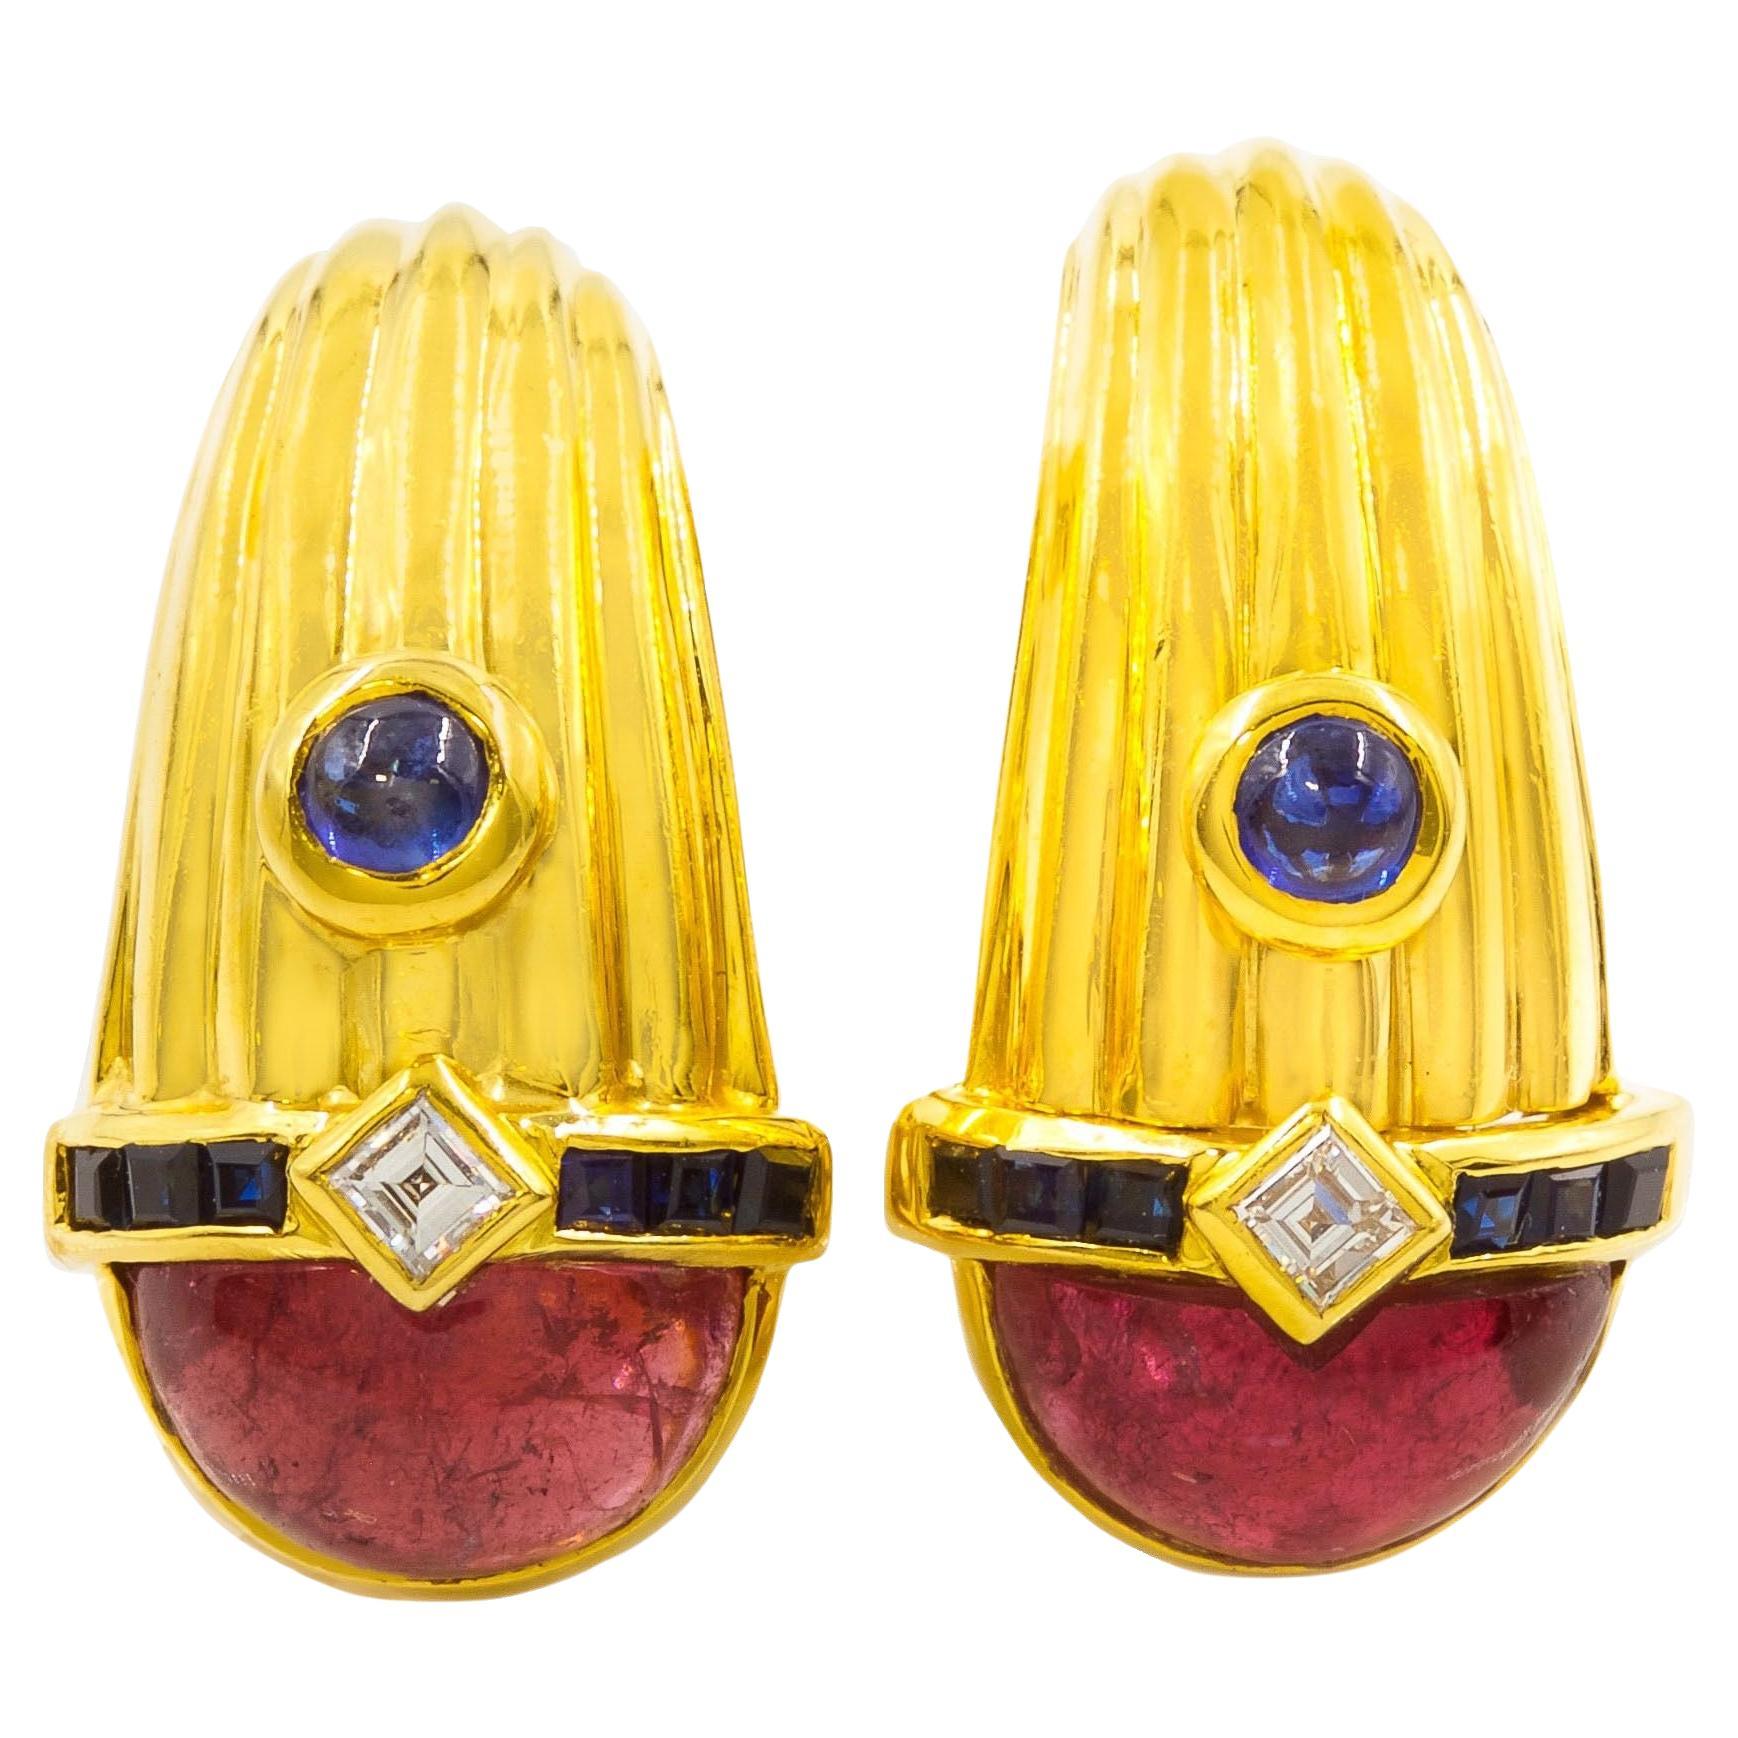 Authentic Italian 18k Gold, Tourmaline and Diamond Earrings by Roberto Legnazzi For Sale